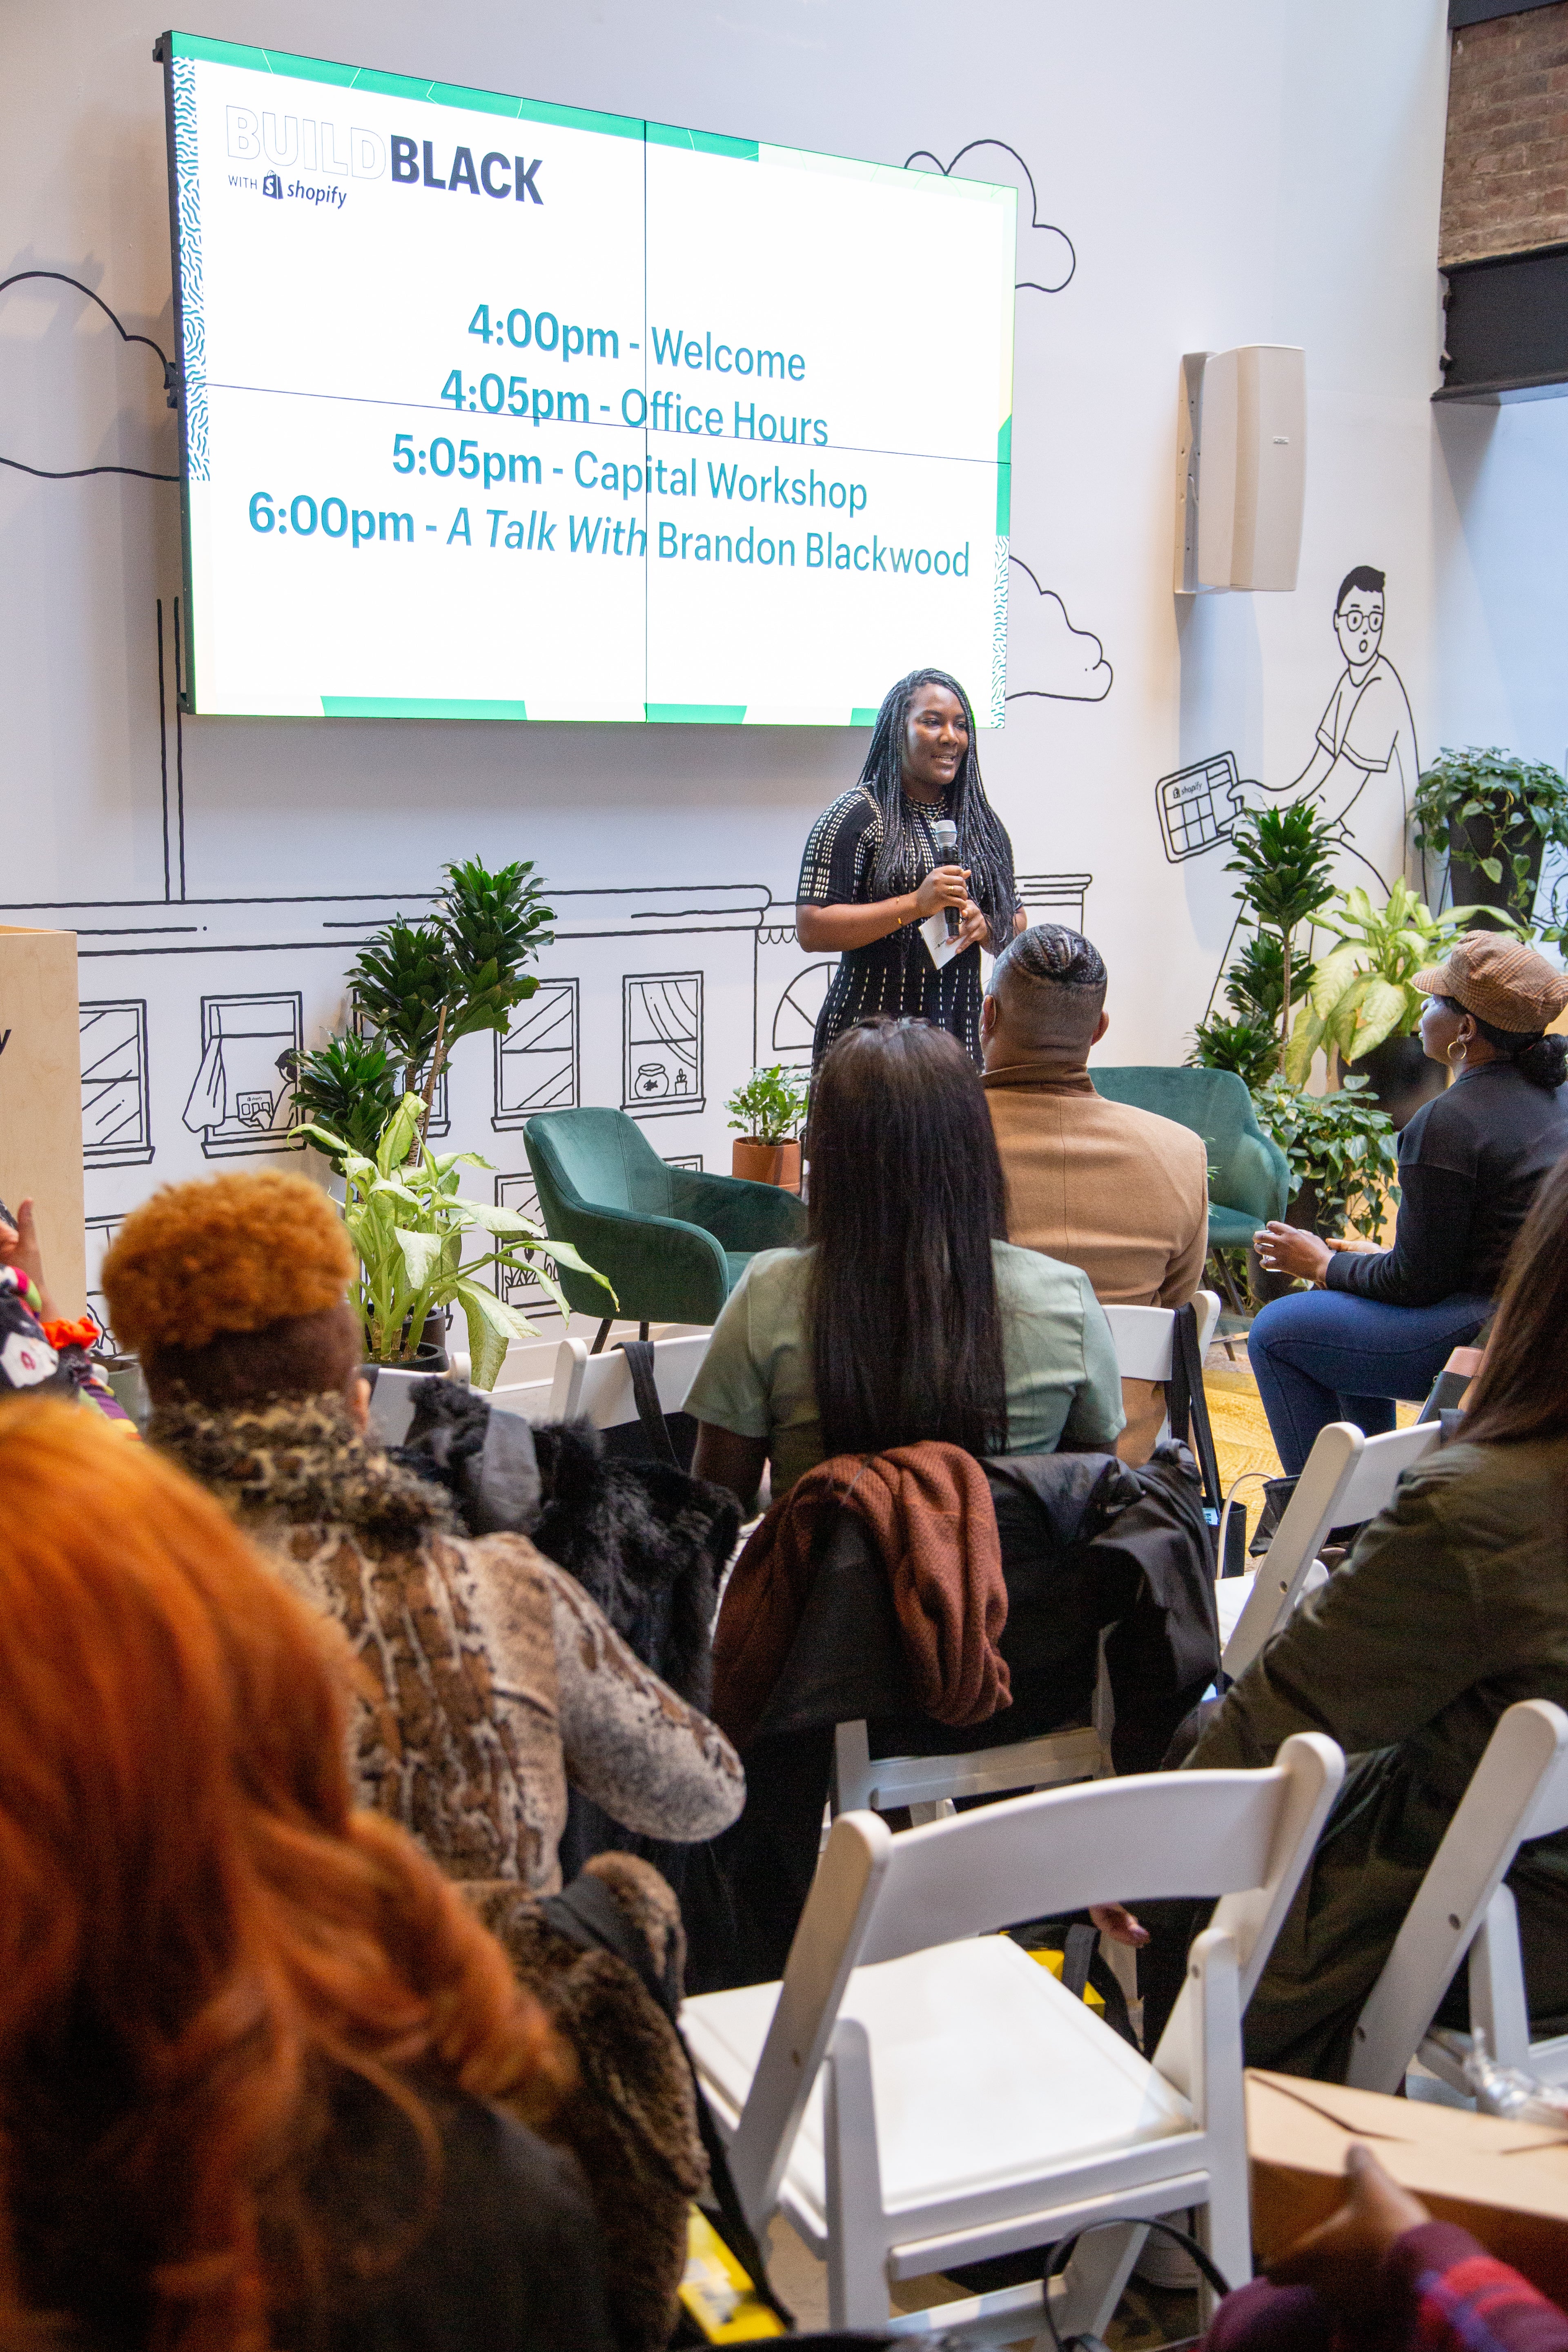 A photo of the Build Black program lead, holding a mic infront of an audience of seated guests at a Build Black event. There's a large monitor behind the program lead indicating the schedule for the event.